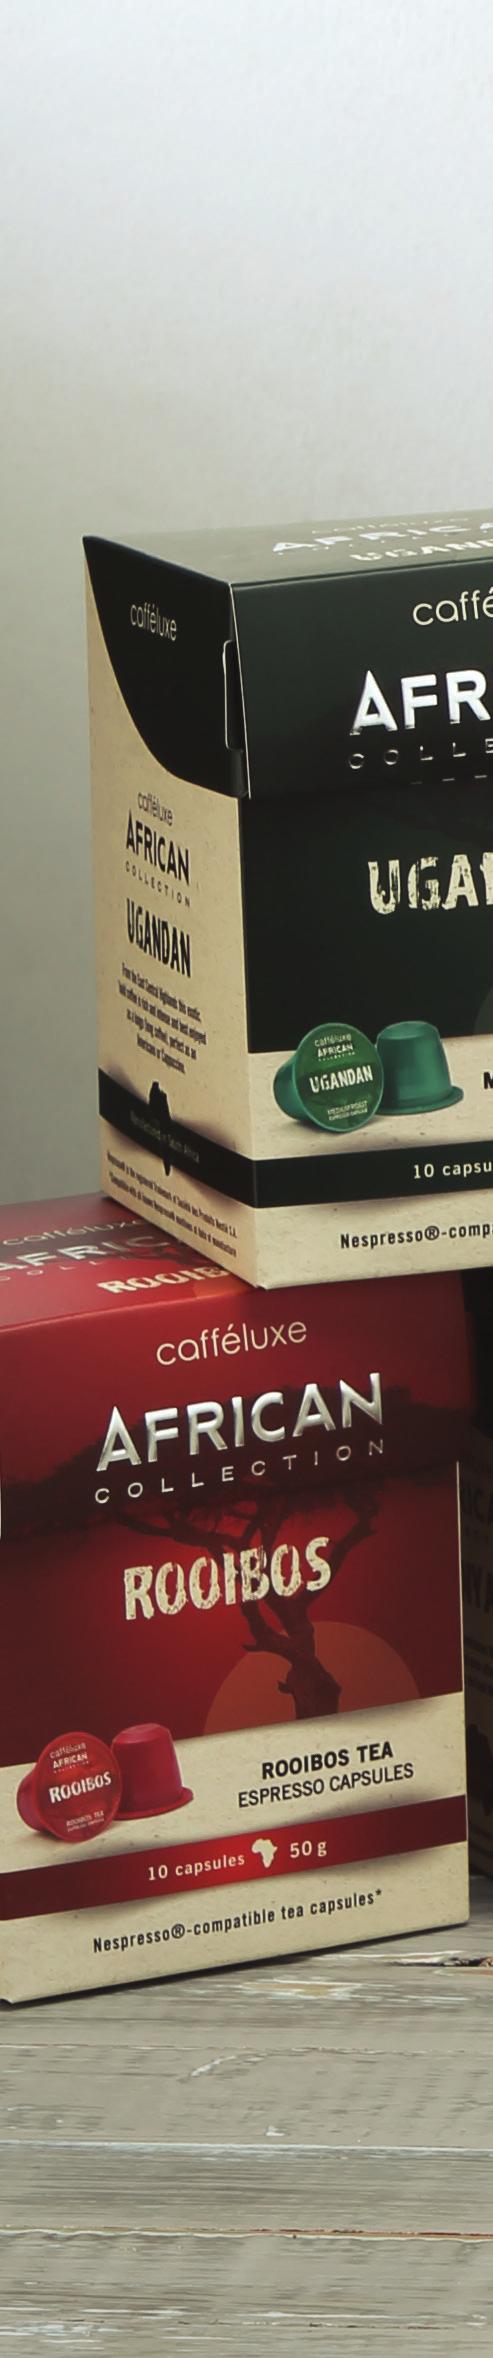 TABLE OF CONTENTS CAFFÉLUXE SIGNATURE RANGE PAGE 3PAGE CAFFÉLUXE AFRICAN COLLECTION 5PAGE CAFFÉLUXE ORIGINS 6PAGE CAFFÉLUXE DOLCE GUSTO COMPATIBLE PODS 8PAGE